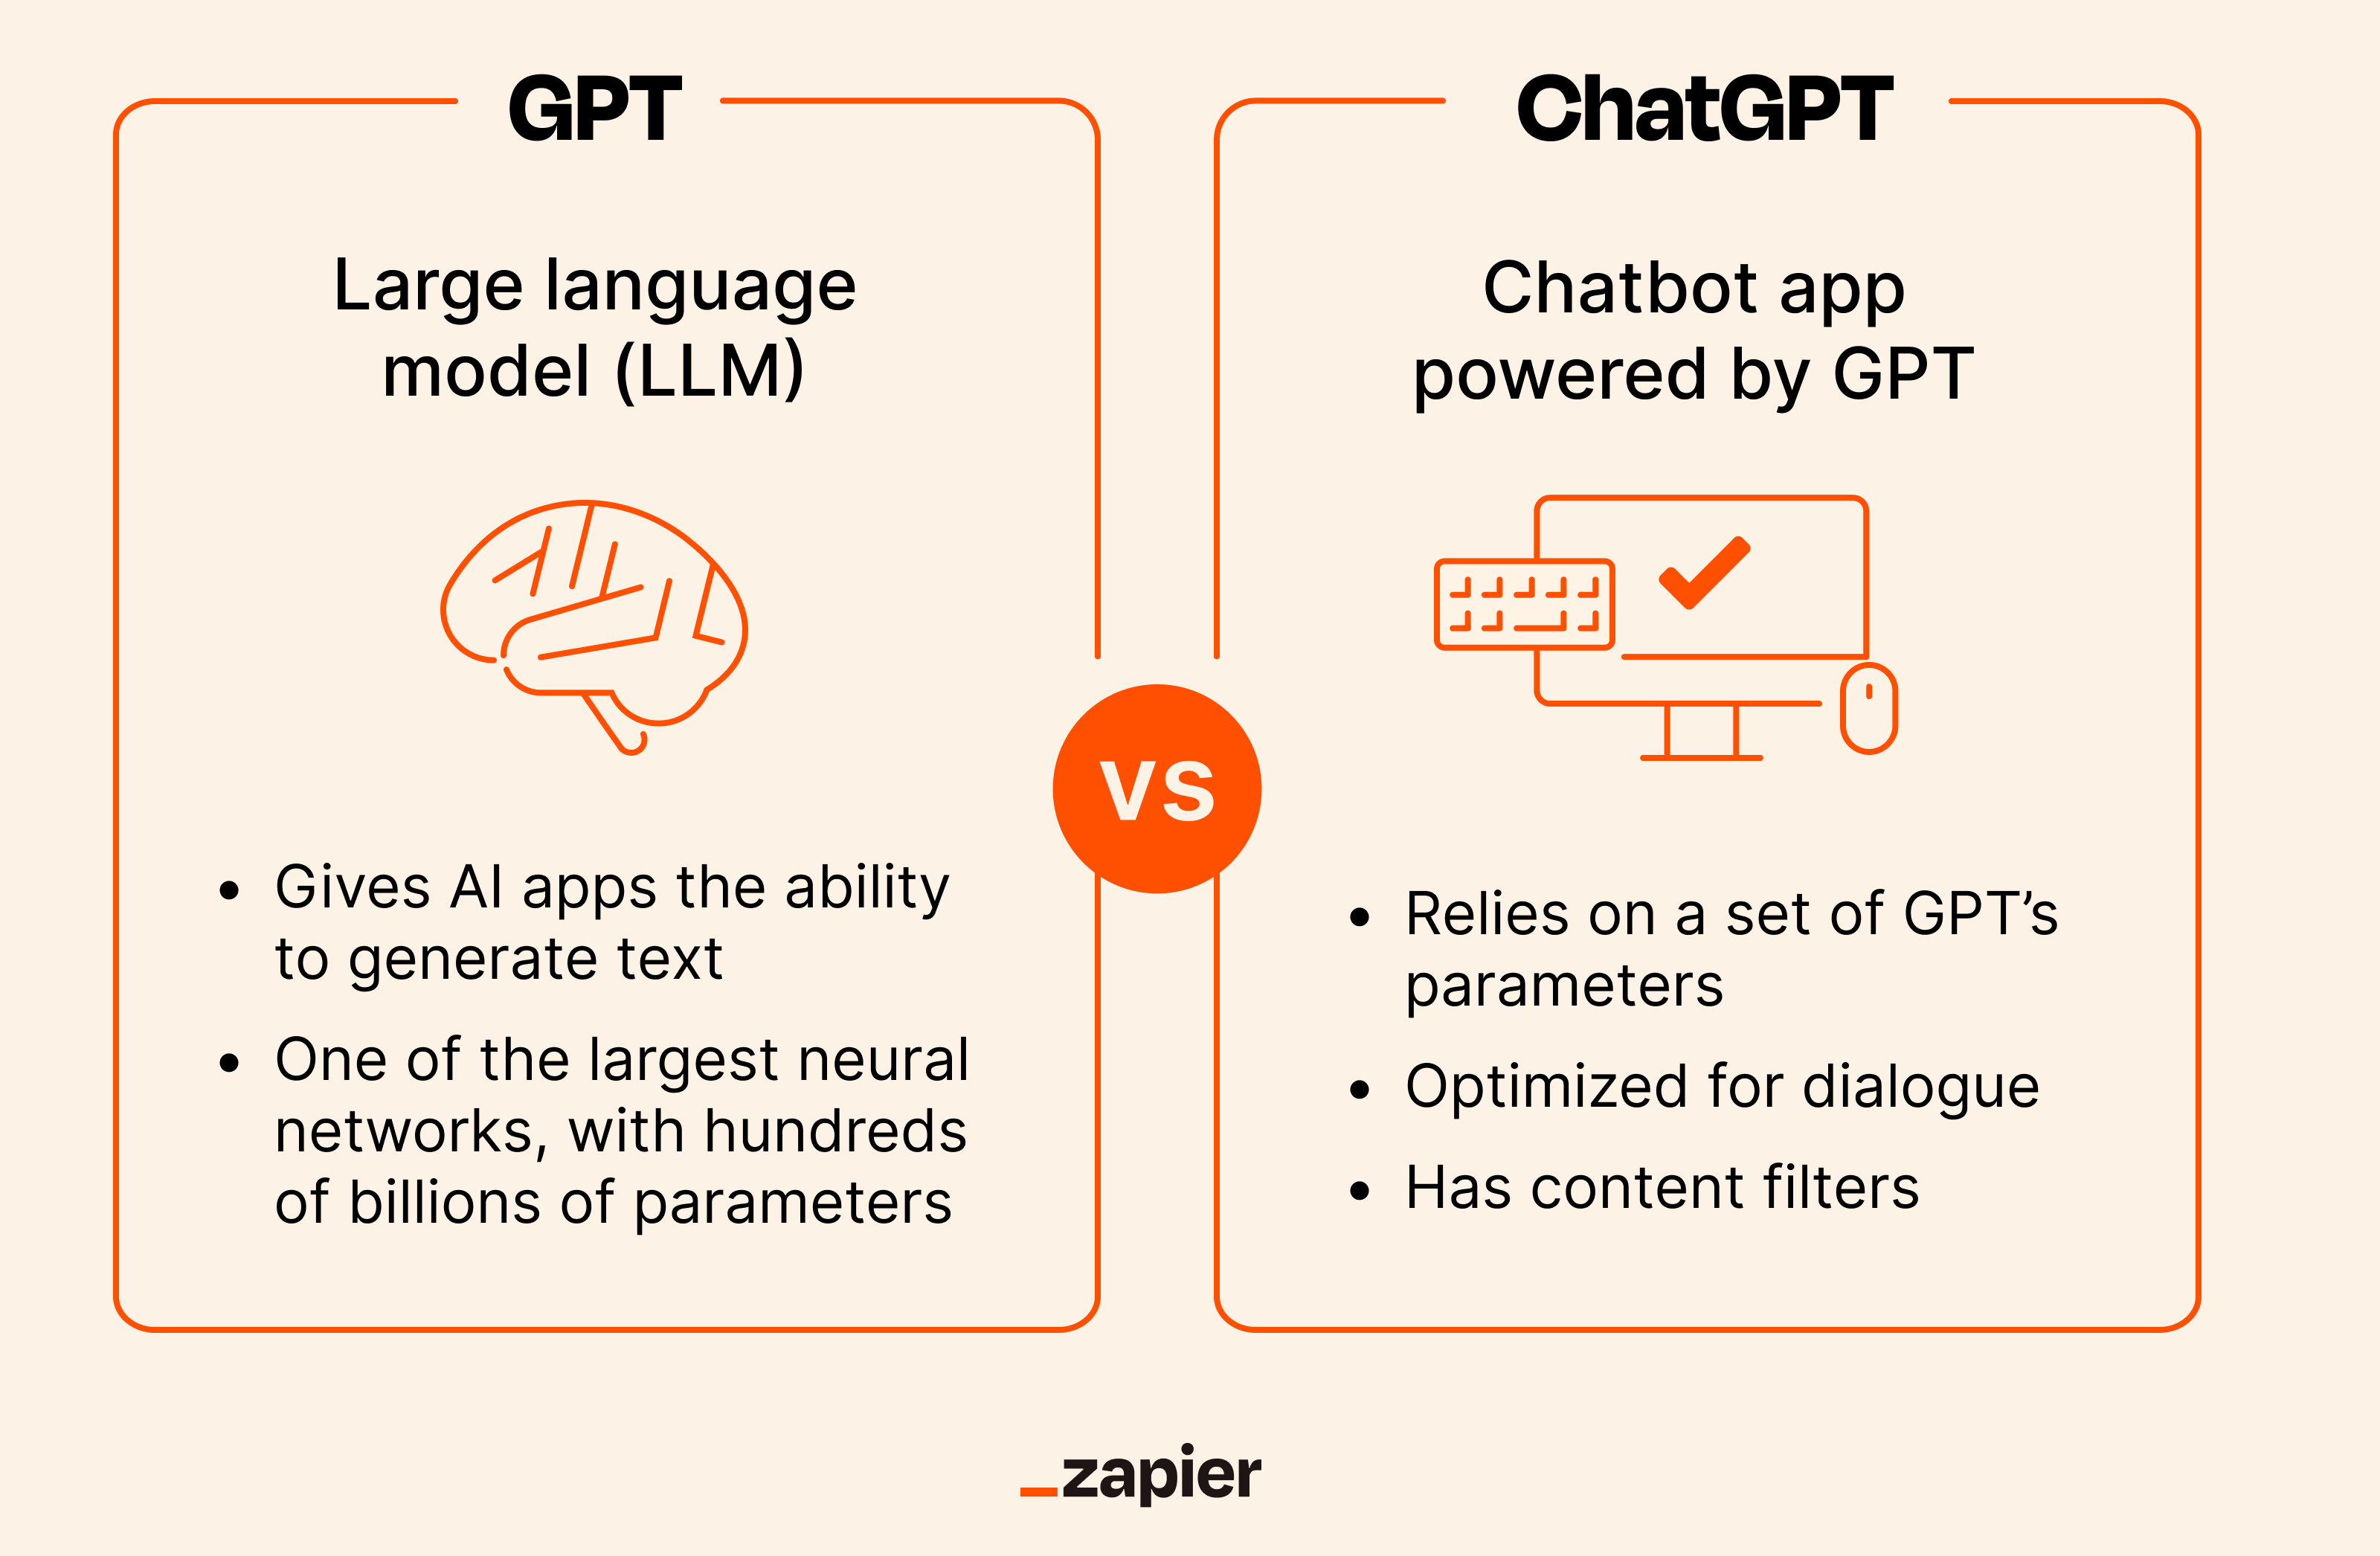 ChatGPT vs. GPT: What's the difference?